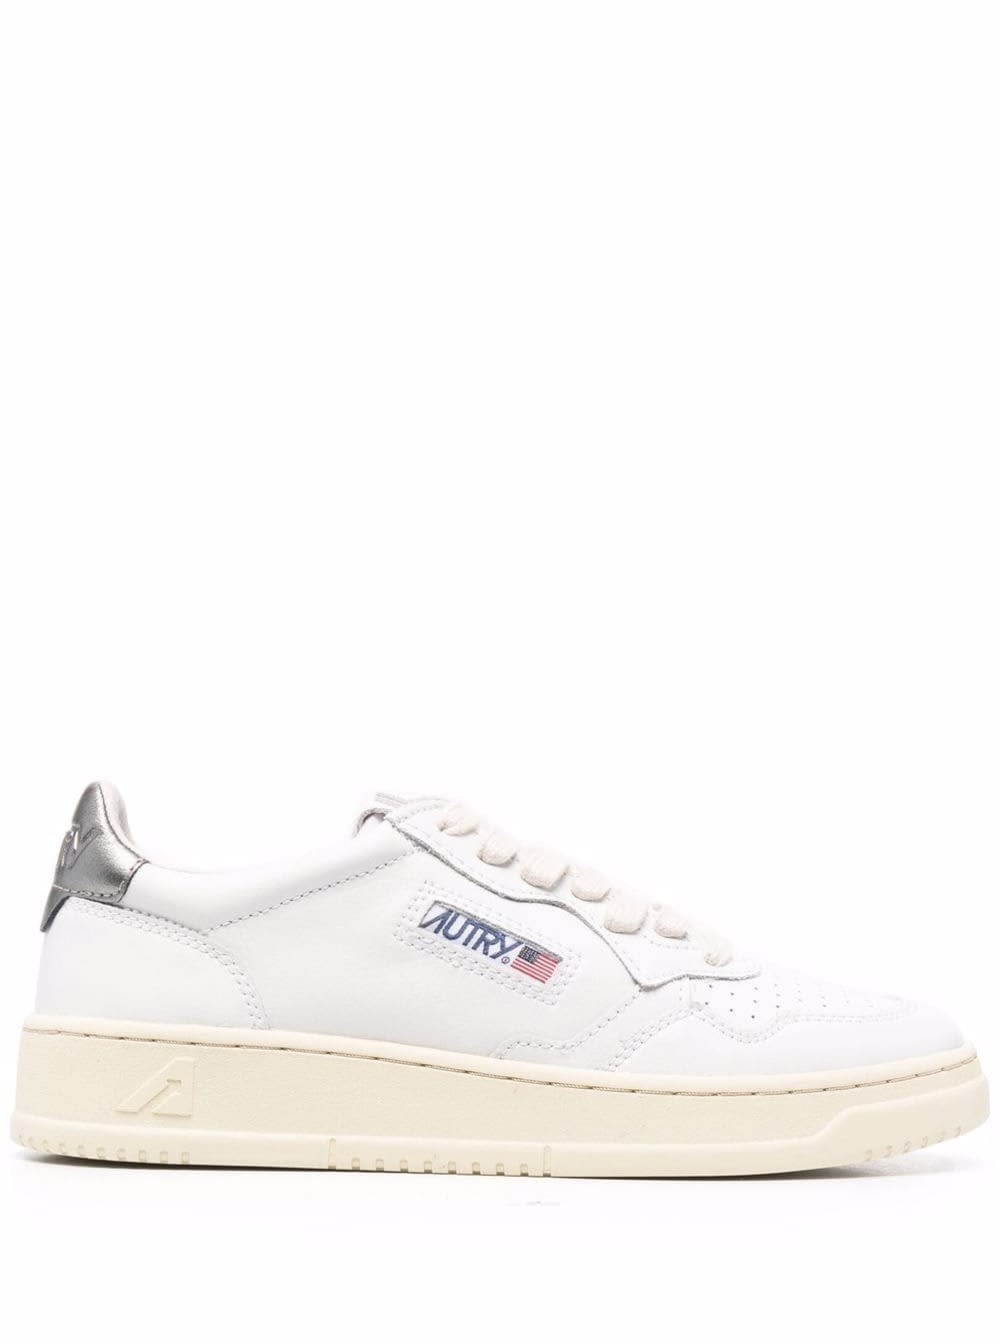 Autry Low 01 White Leather Sneakers With Silver Heel Tab